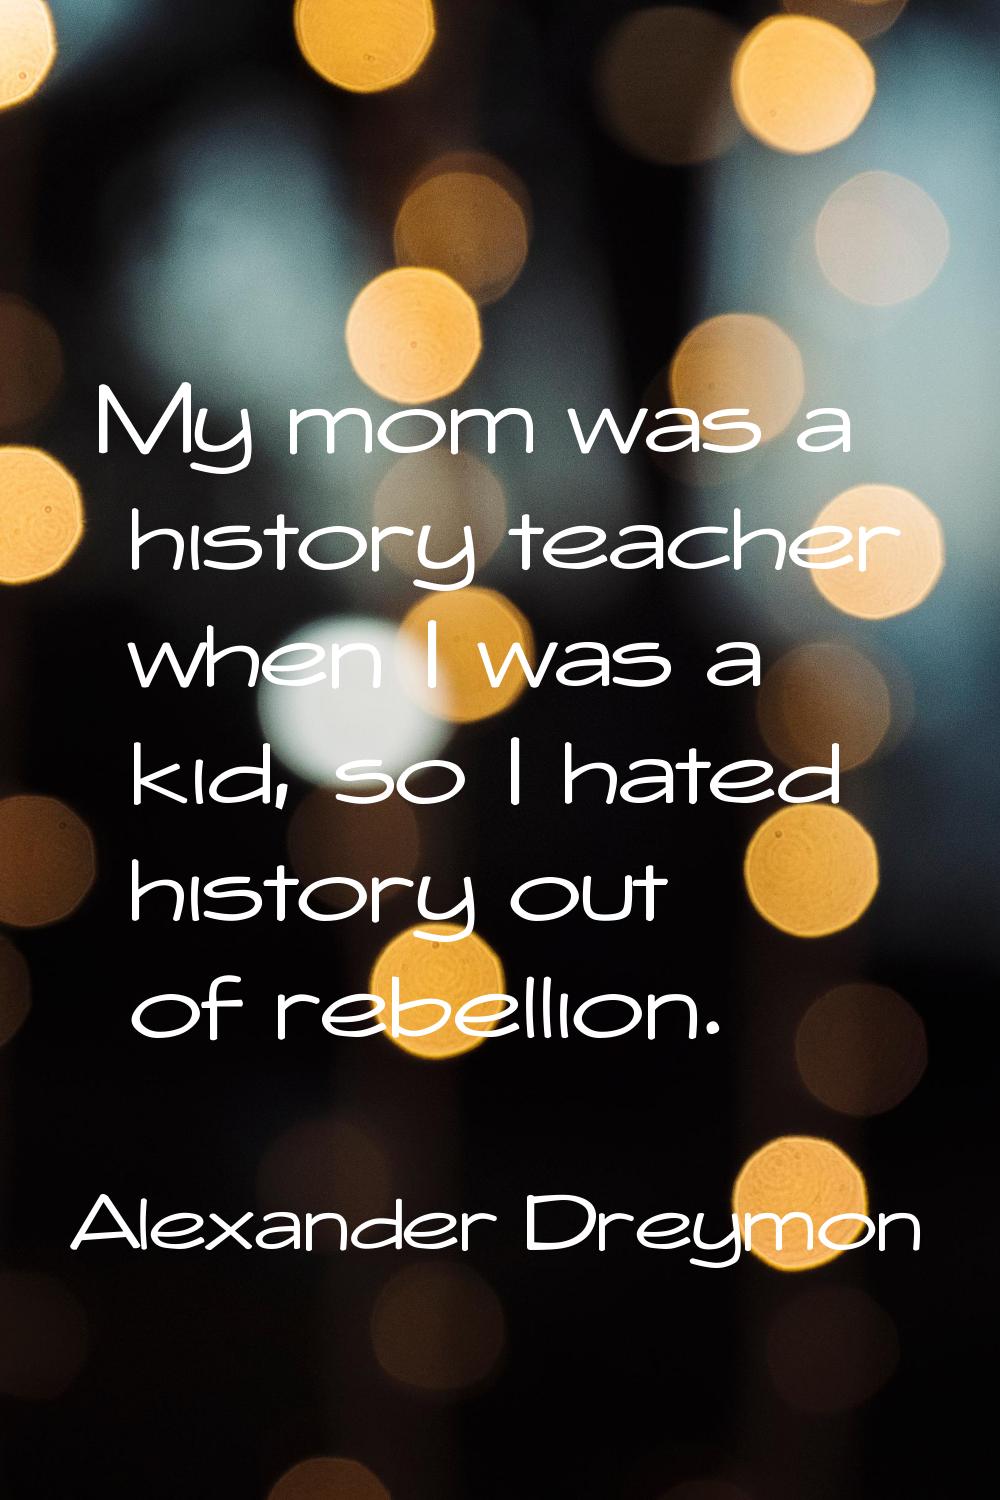 My mom was a history teacher when I was a kid, so I hated history out of rebellion.